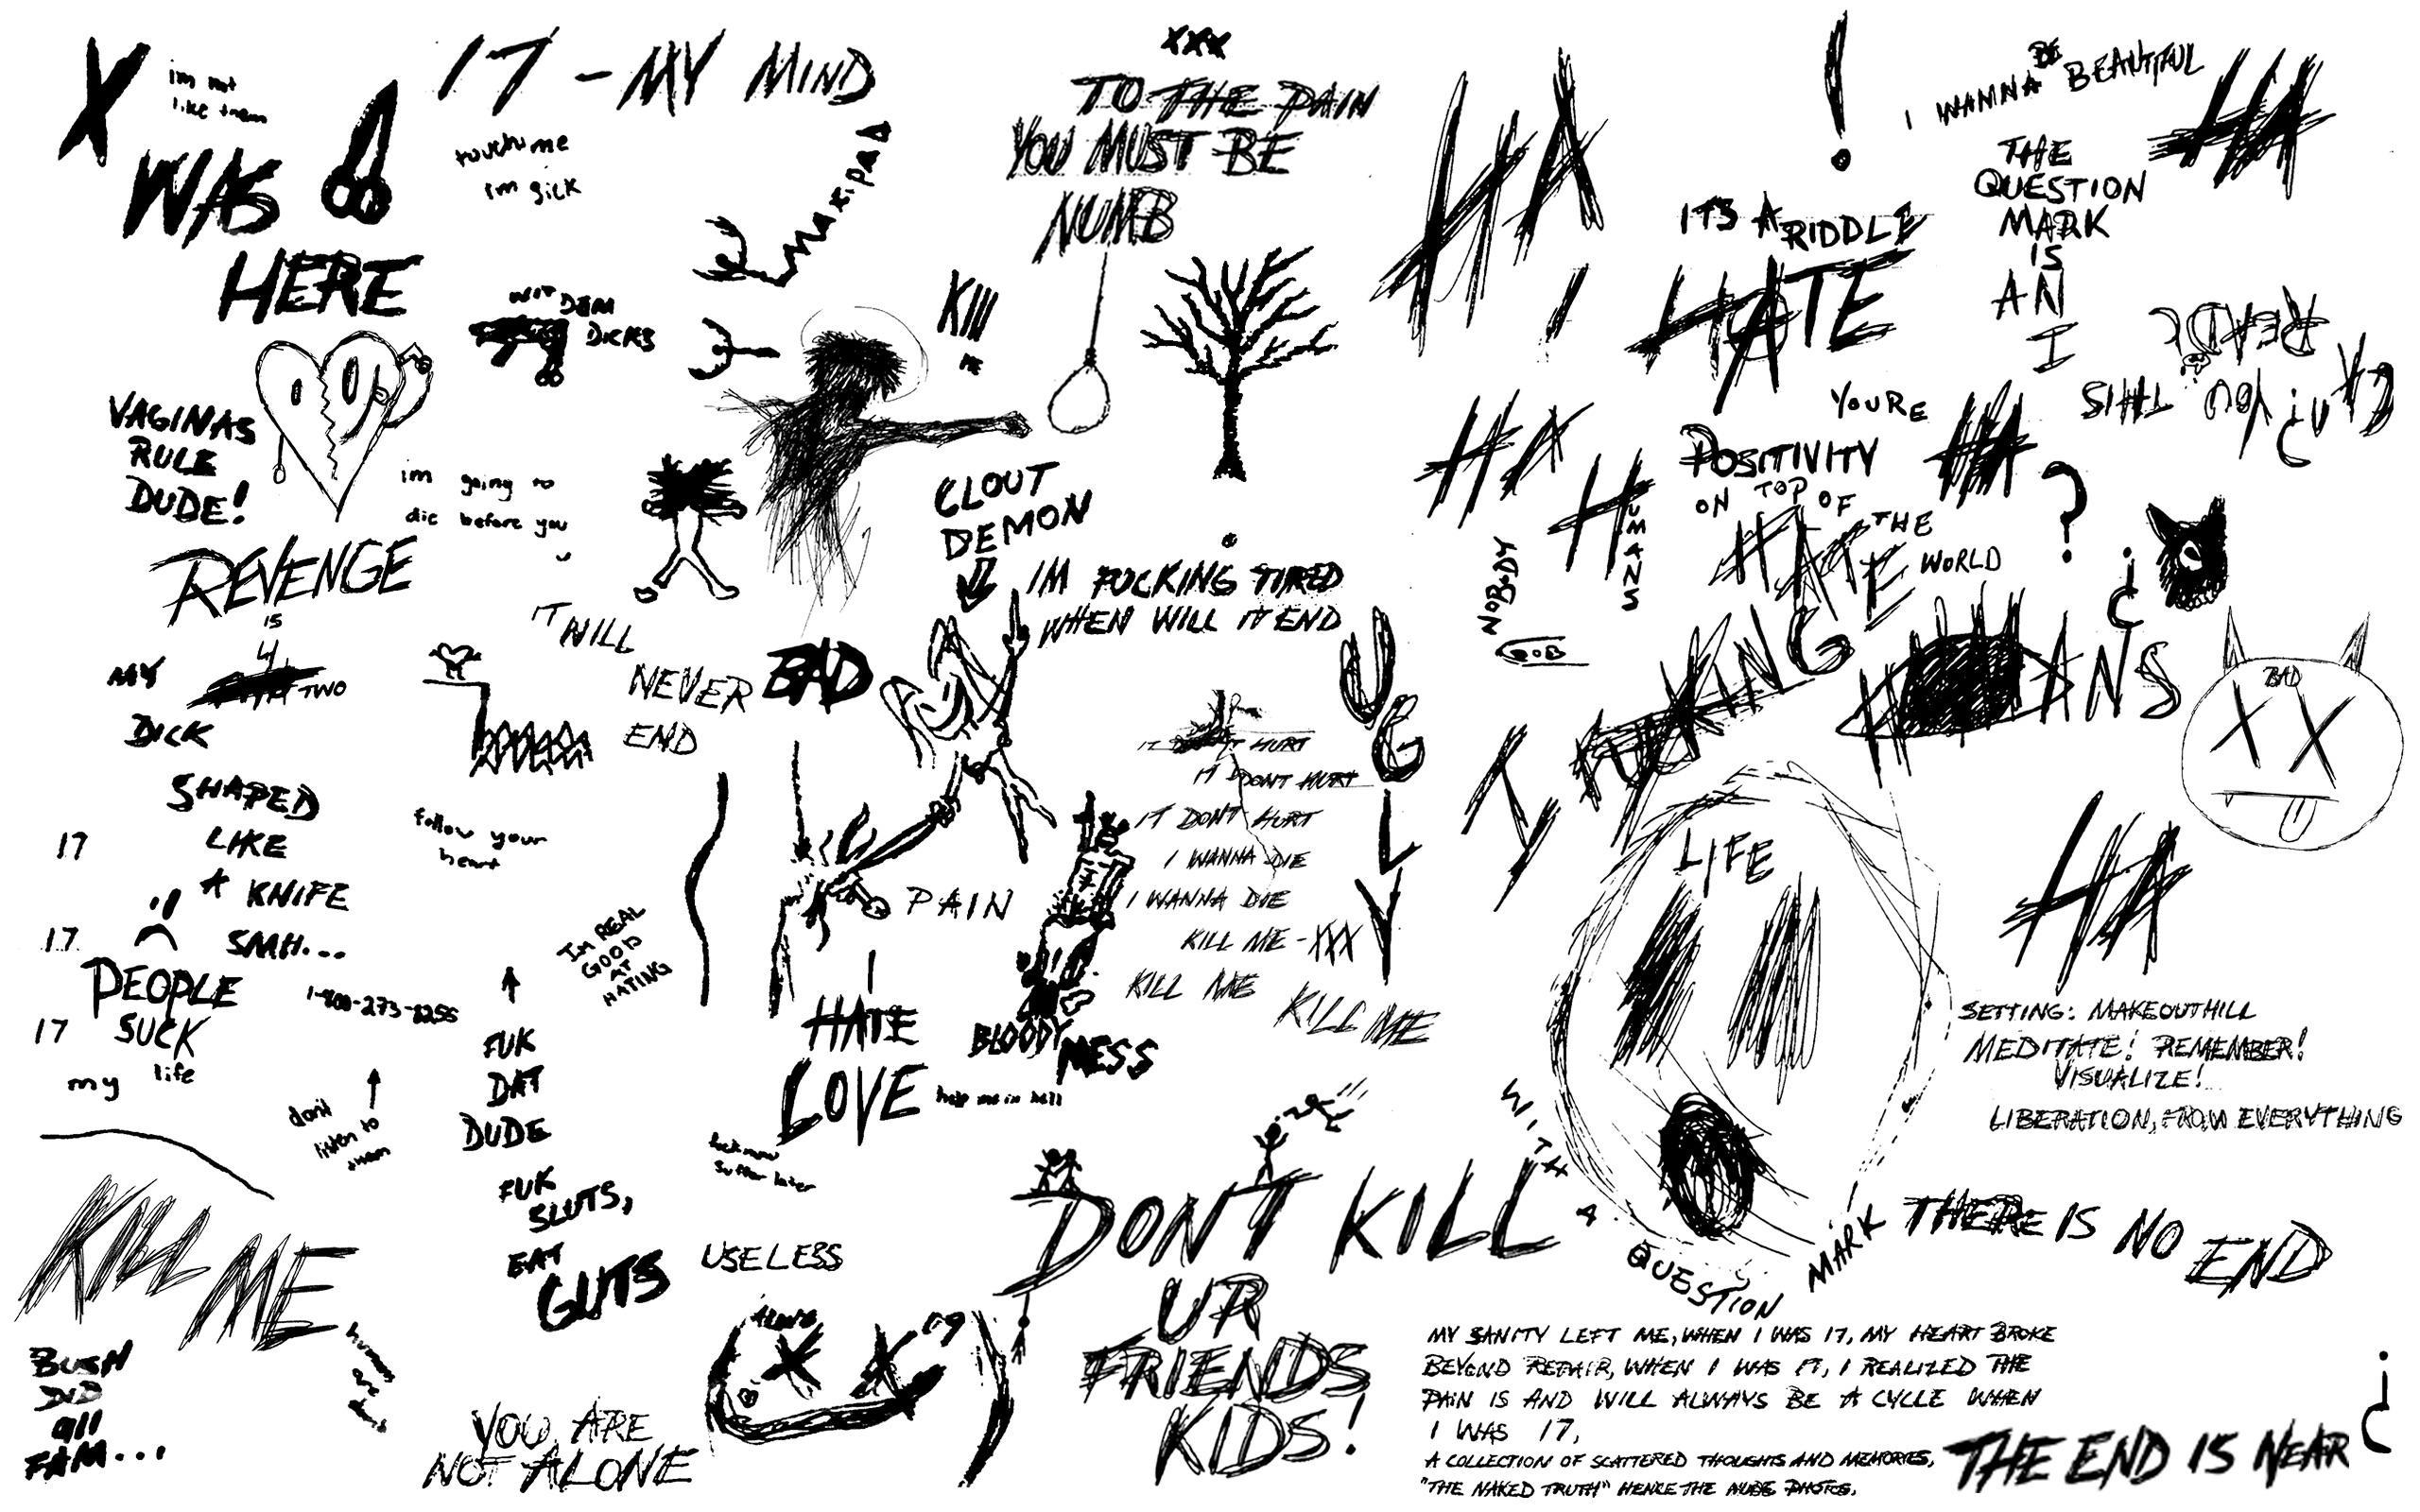 Made this XXXTentacion wallpaper out if his drawings! Don't